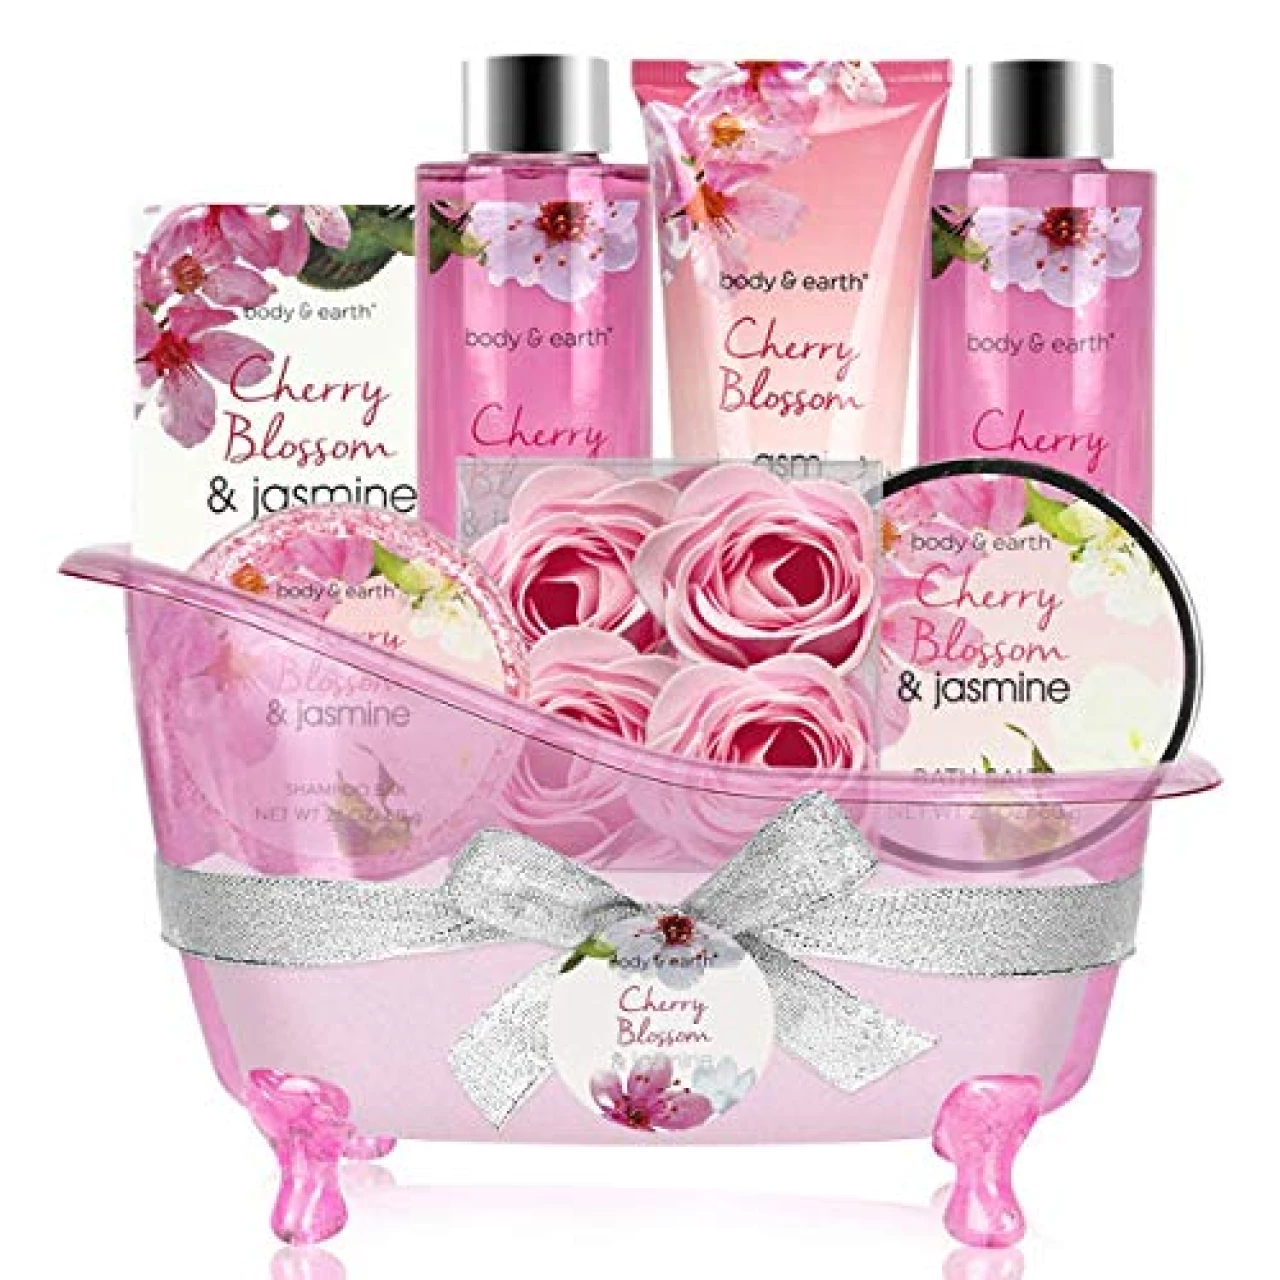 Gift Baskets for Women - Body &amp; Earth Bath and Body Spa Gift Set with Cherry Blossom &amp; Jasmine Scent